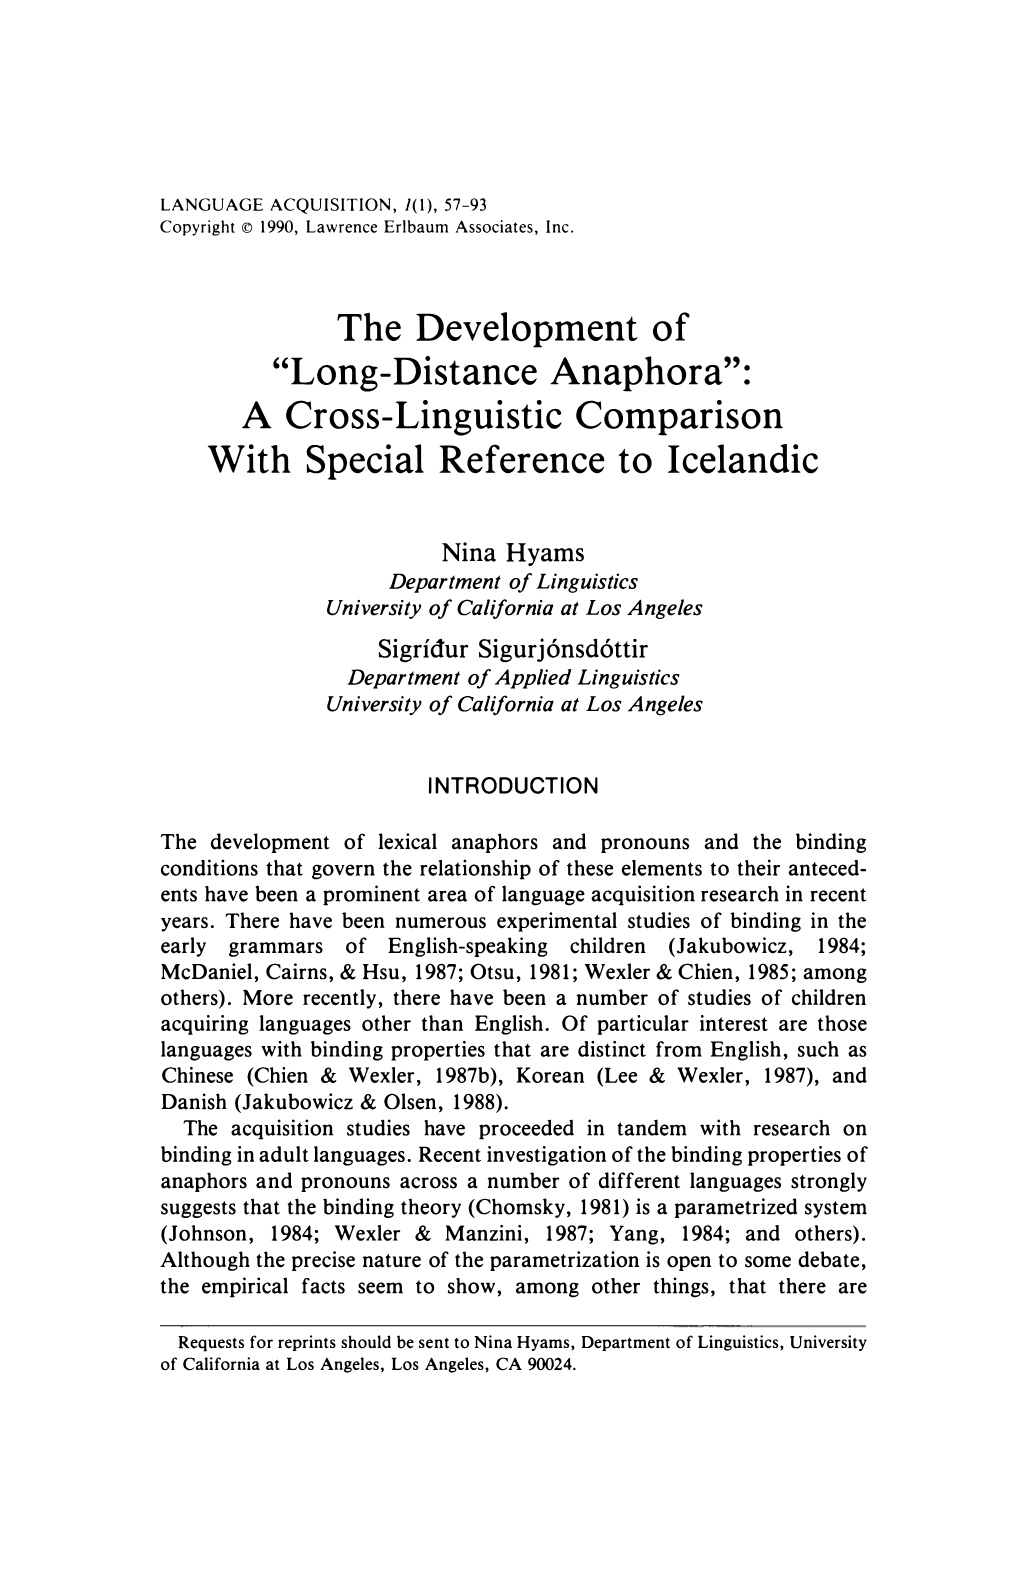 The Development of "Long-Distance Anaphora": a Cross-Linguistic Comparison with Special Reference to Icelandic